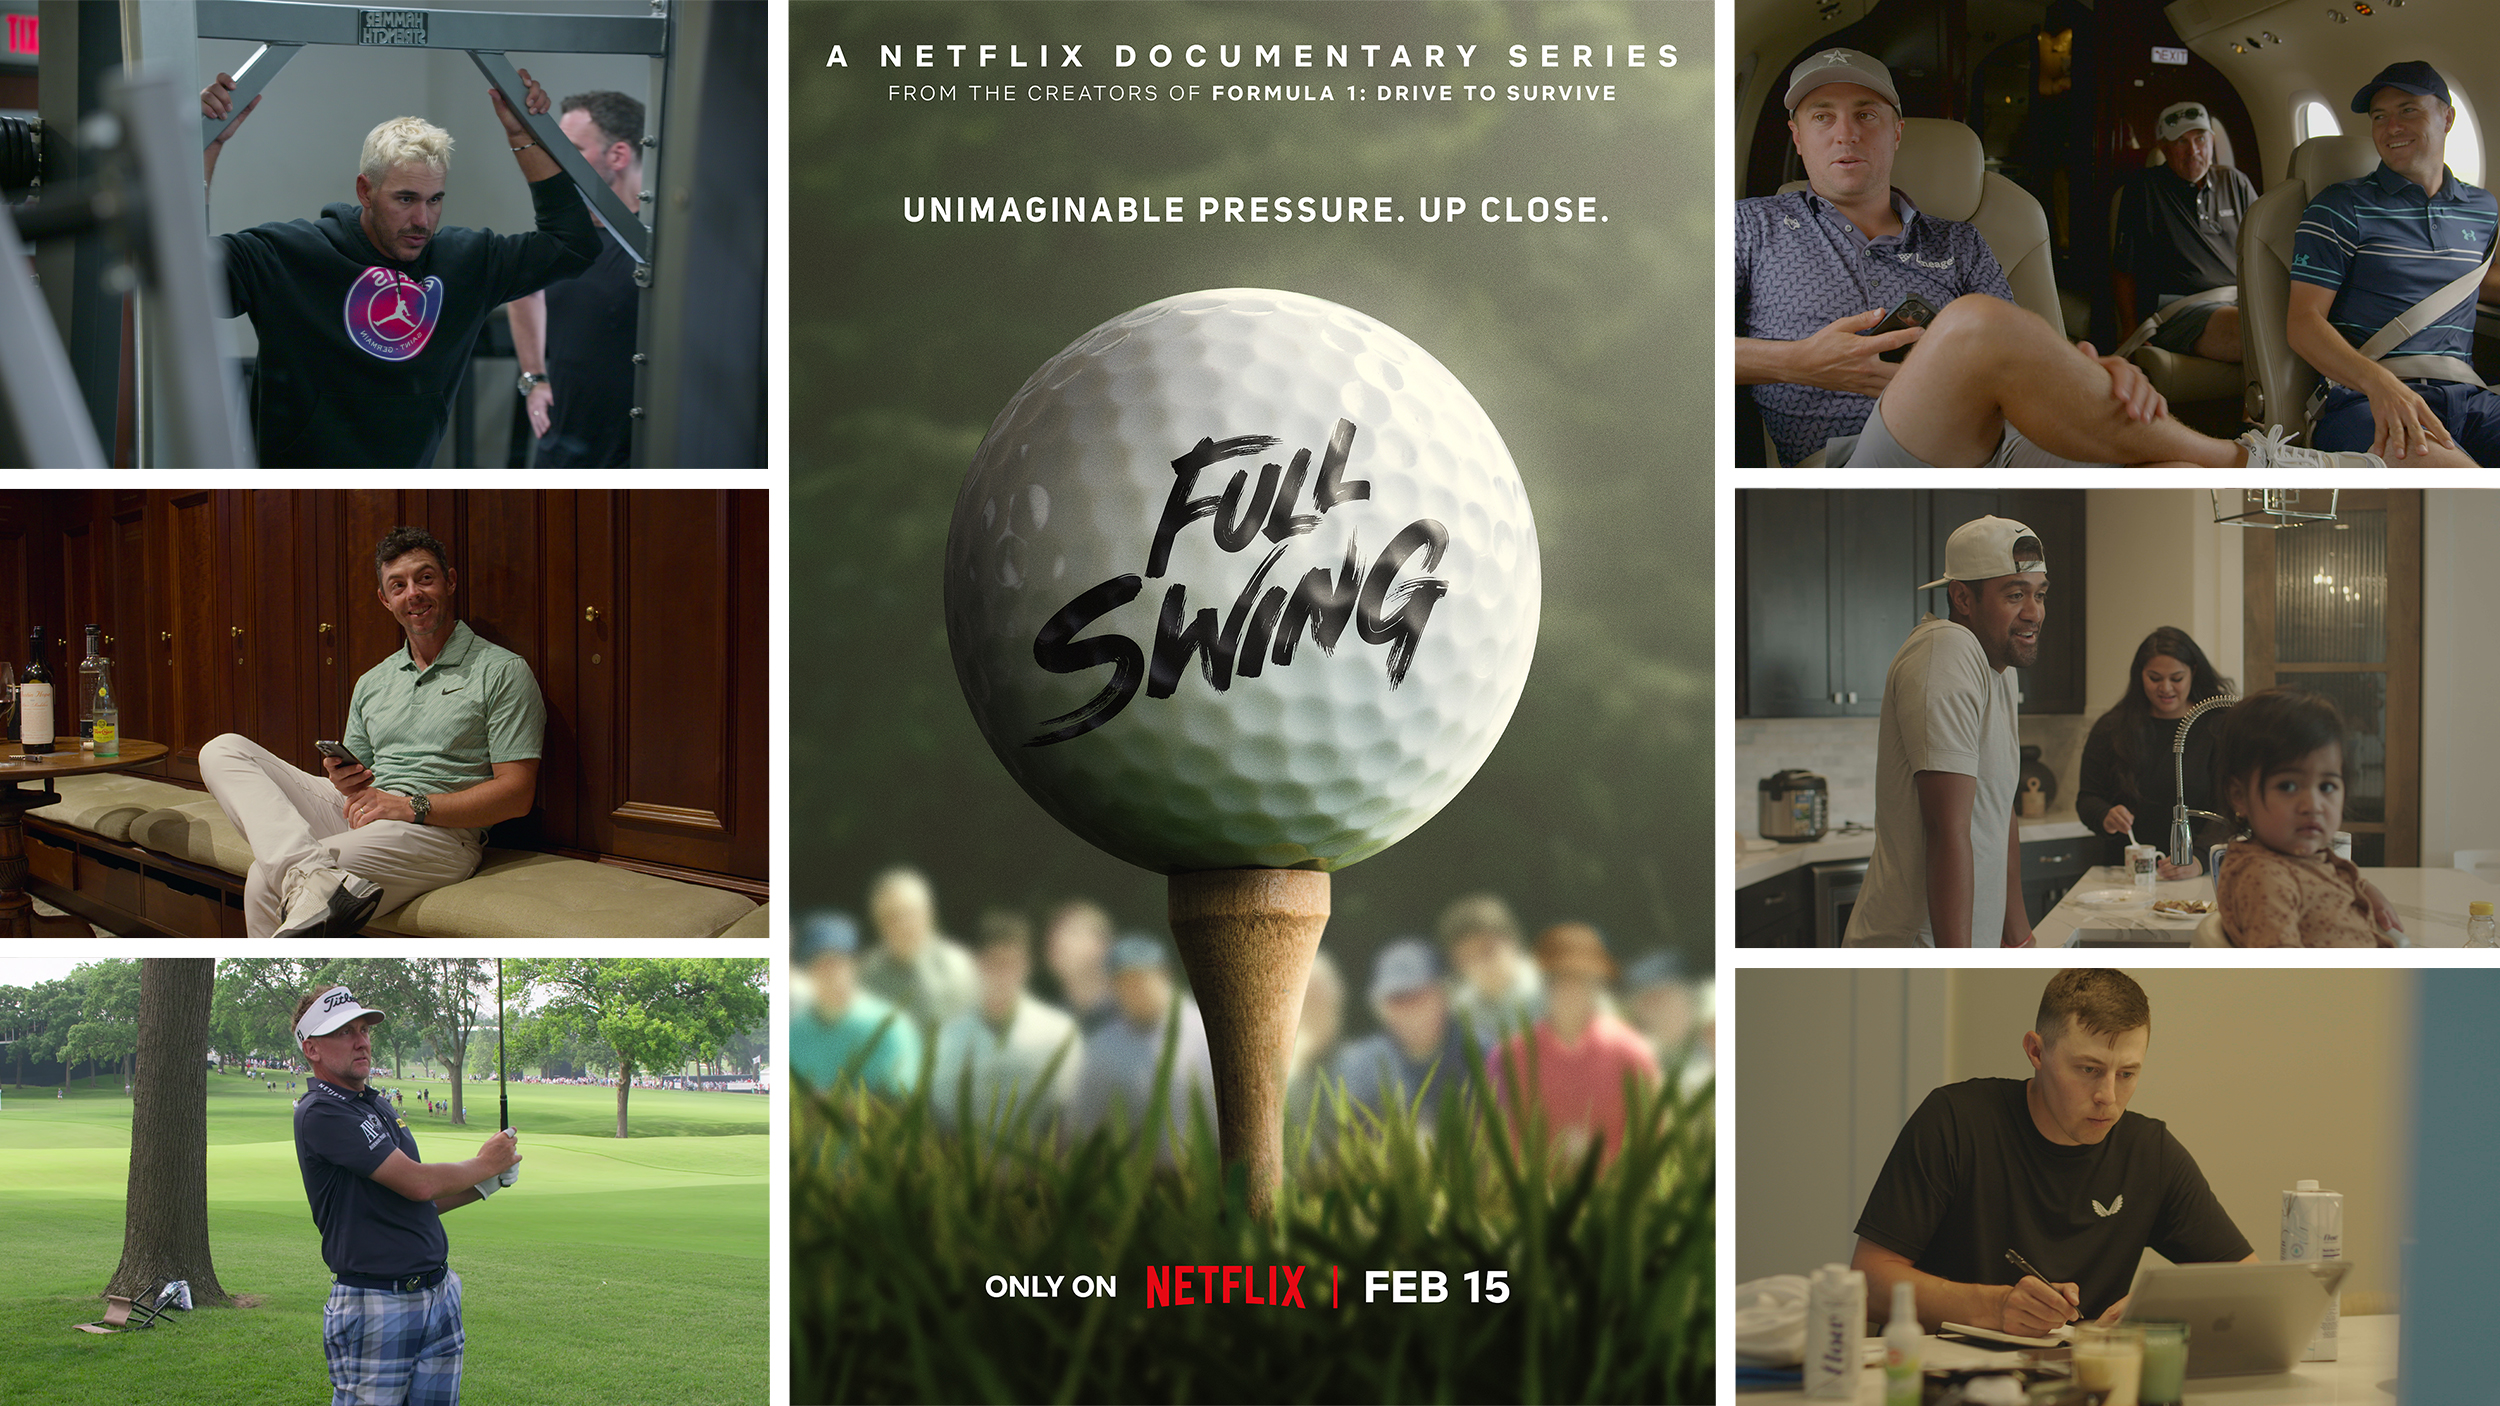 PGA Tour, LIV Golf players we want to see in Full Swing on Netflix